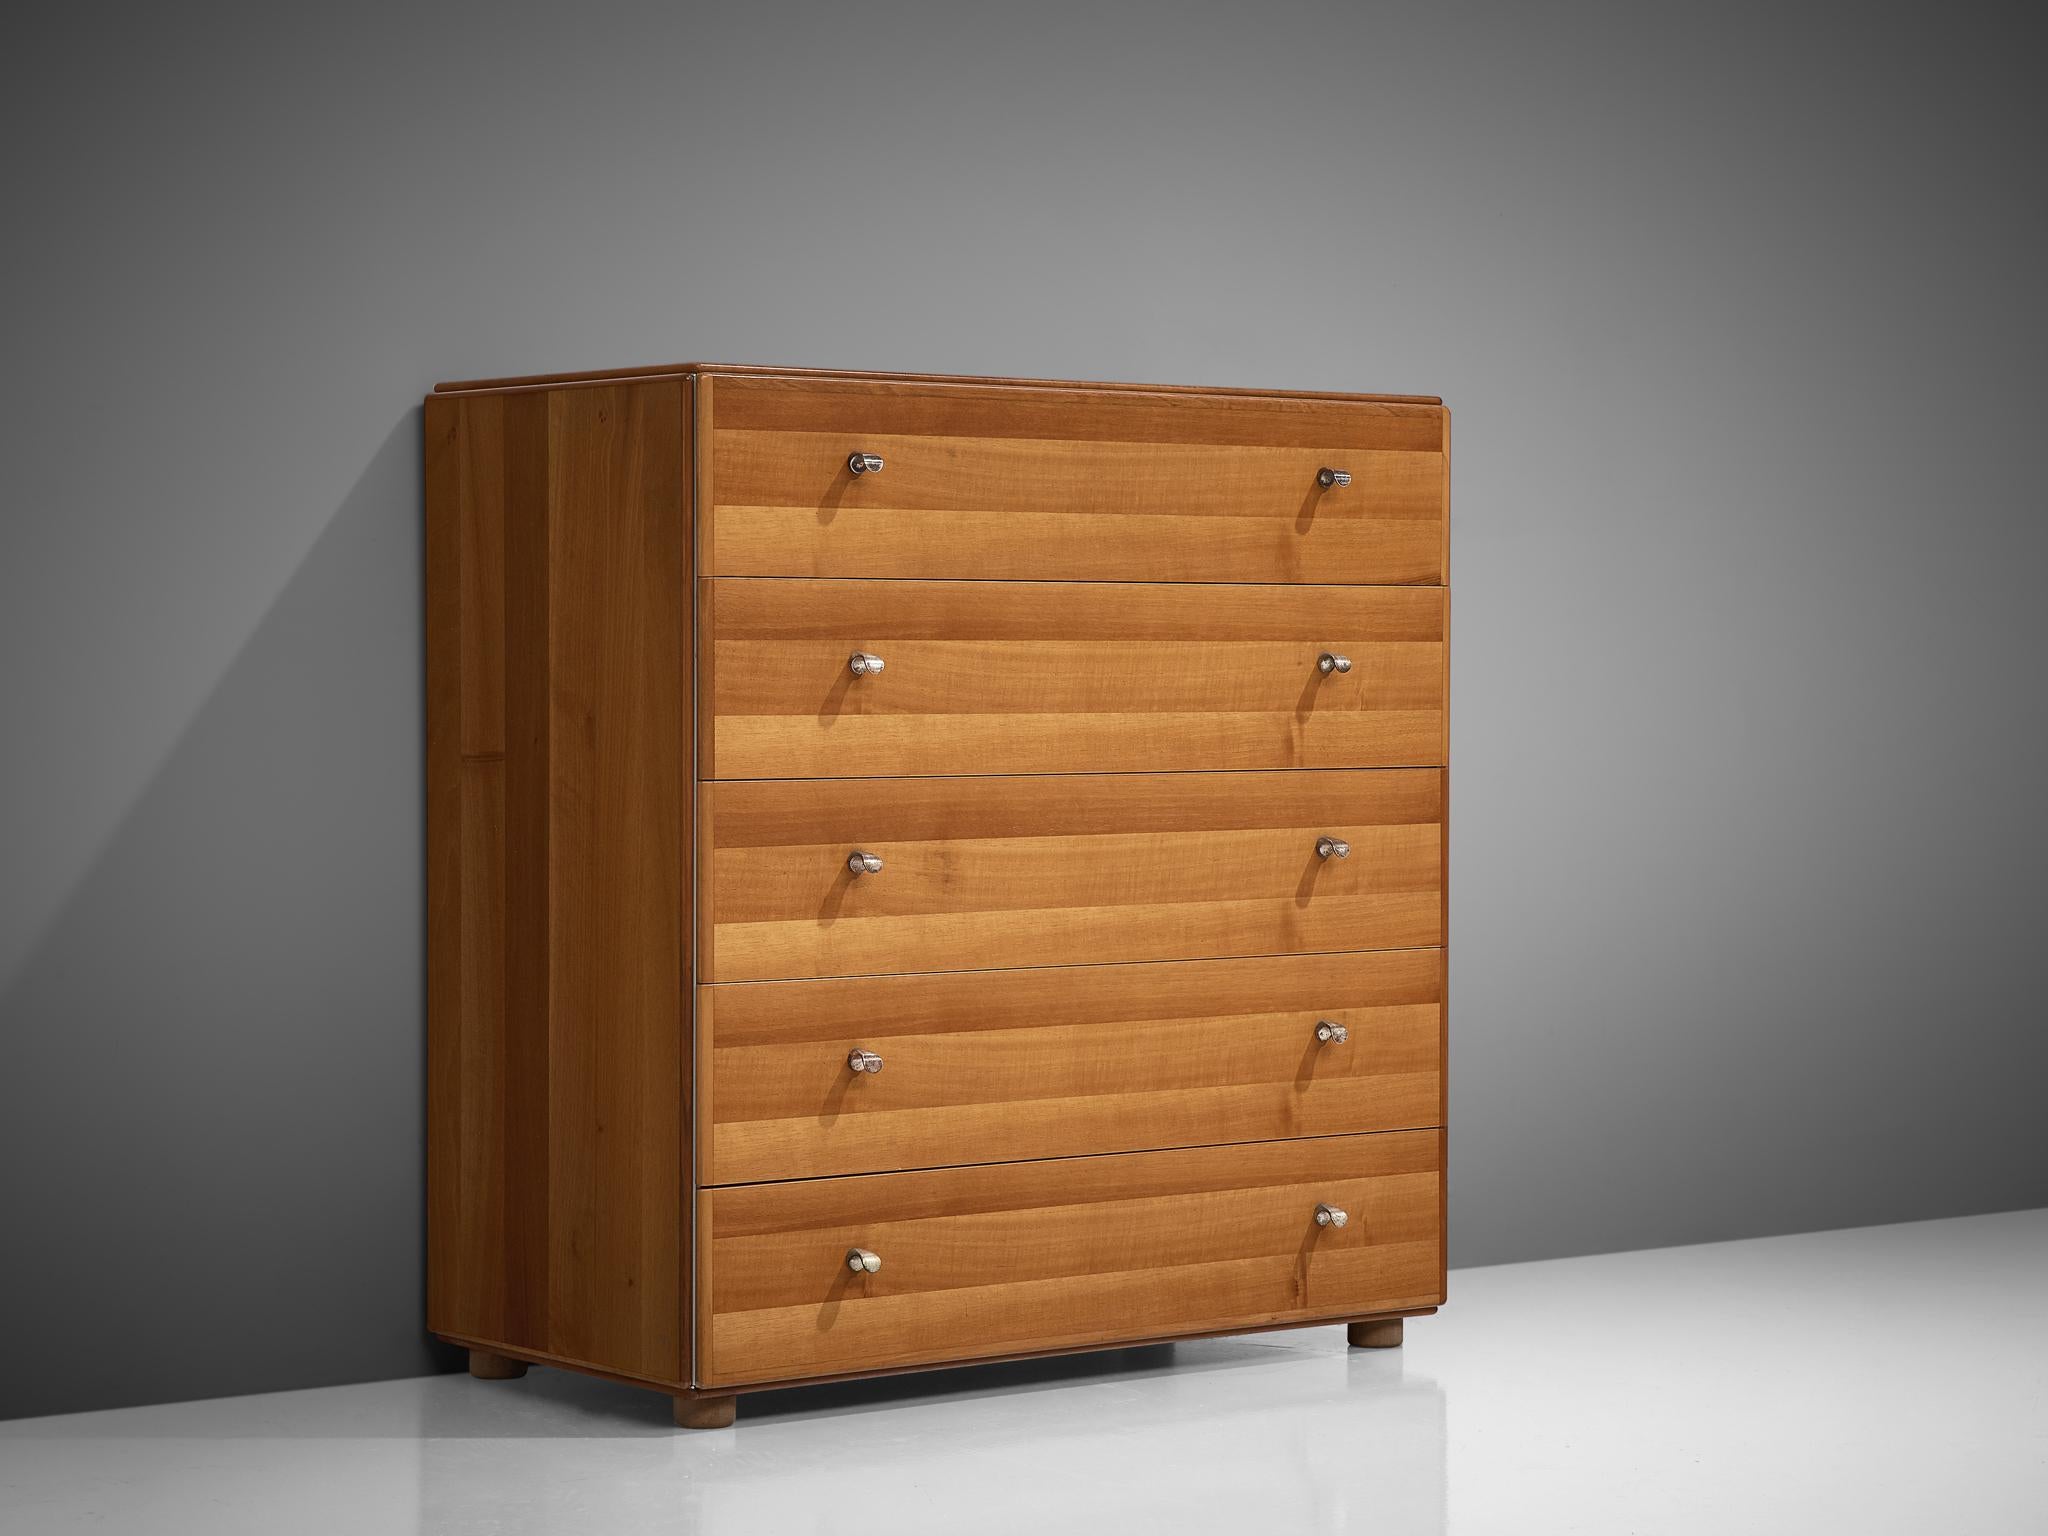 Tobia Scarpa, chest of drawers, walnut, Italy, 1960s .
This cabinet was designed by Tobia Scarpa, and shows a clear design that characterizes the work of Scarpa.  The piece shows wonderful subtle details, such as the rounded door edges and hinges